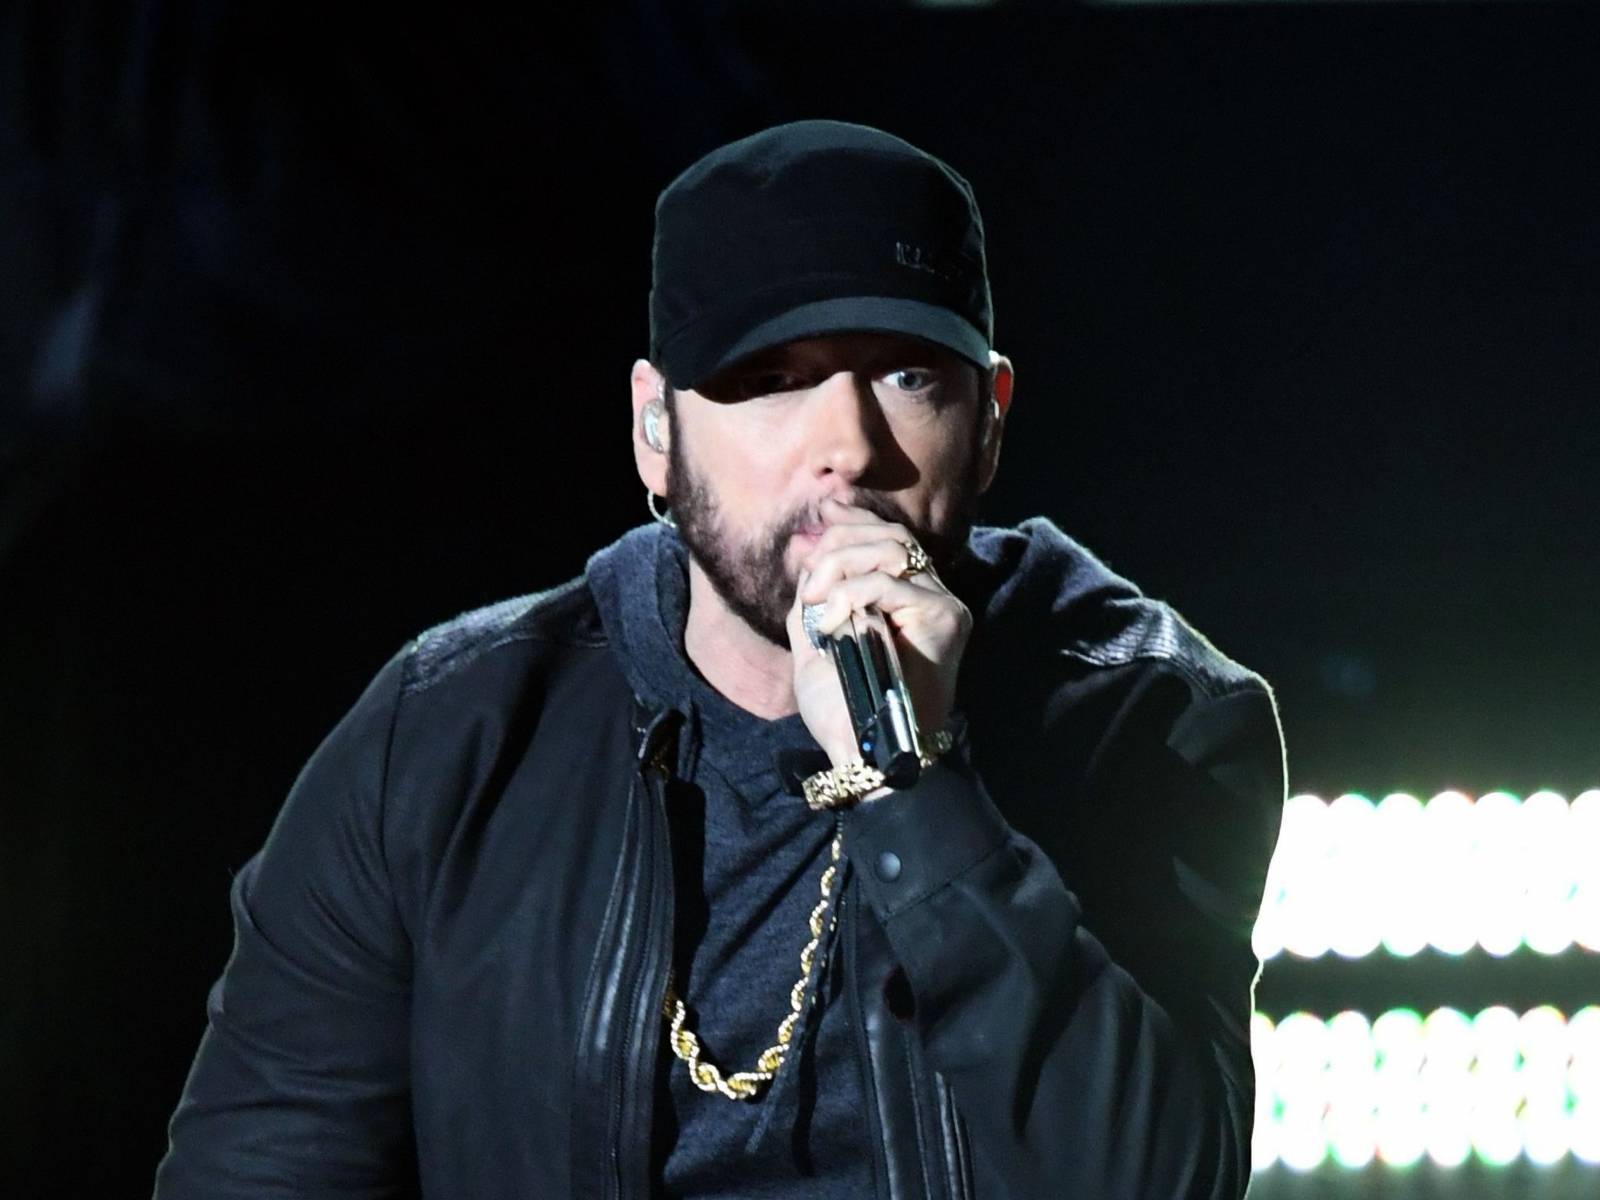 Eminem Drops Lyric Video For 'Godzilla' Featuring The Late Juice